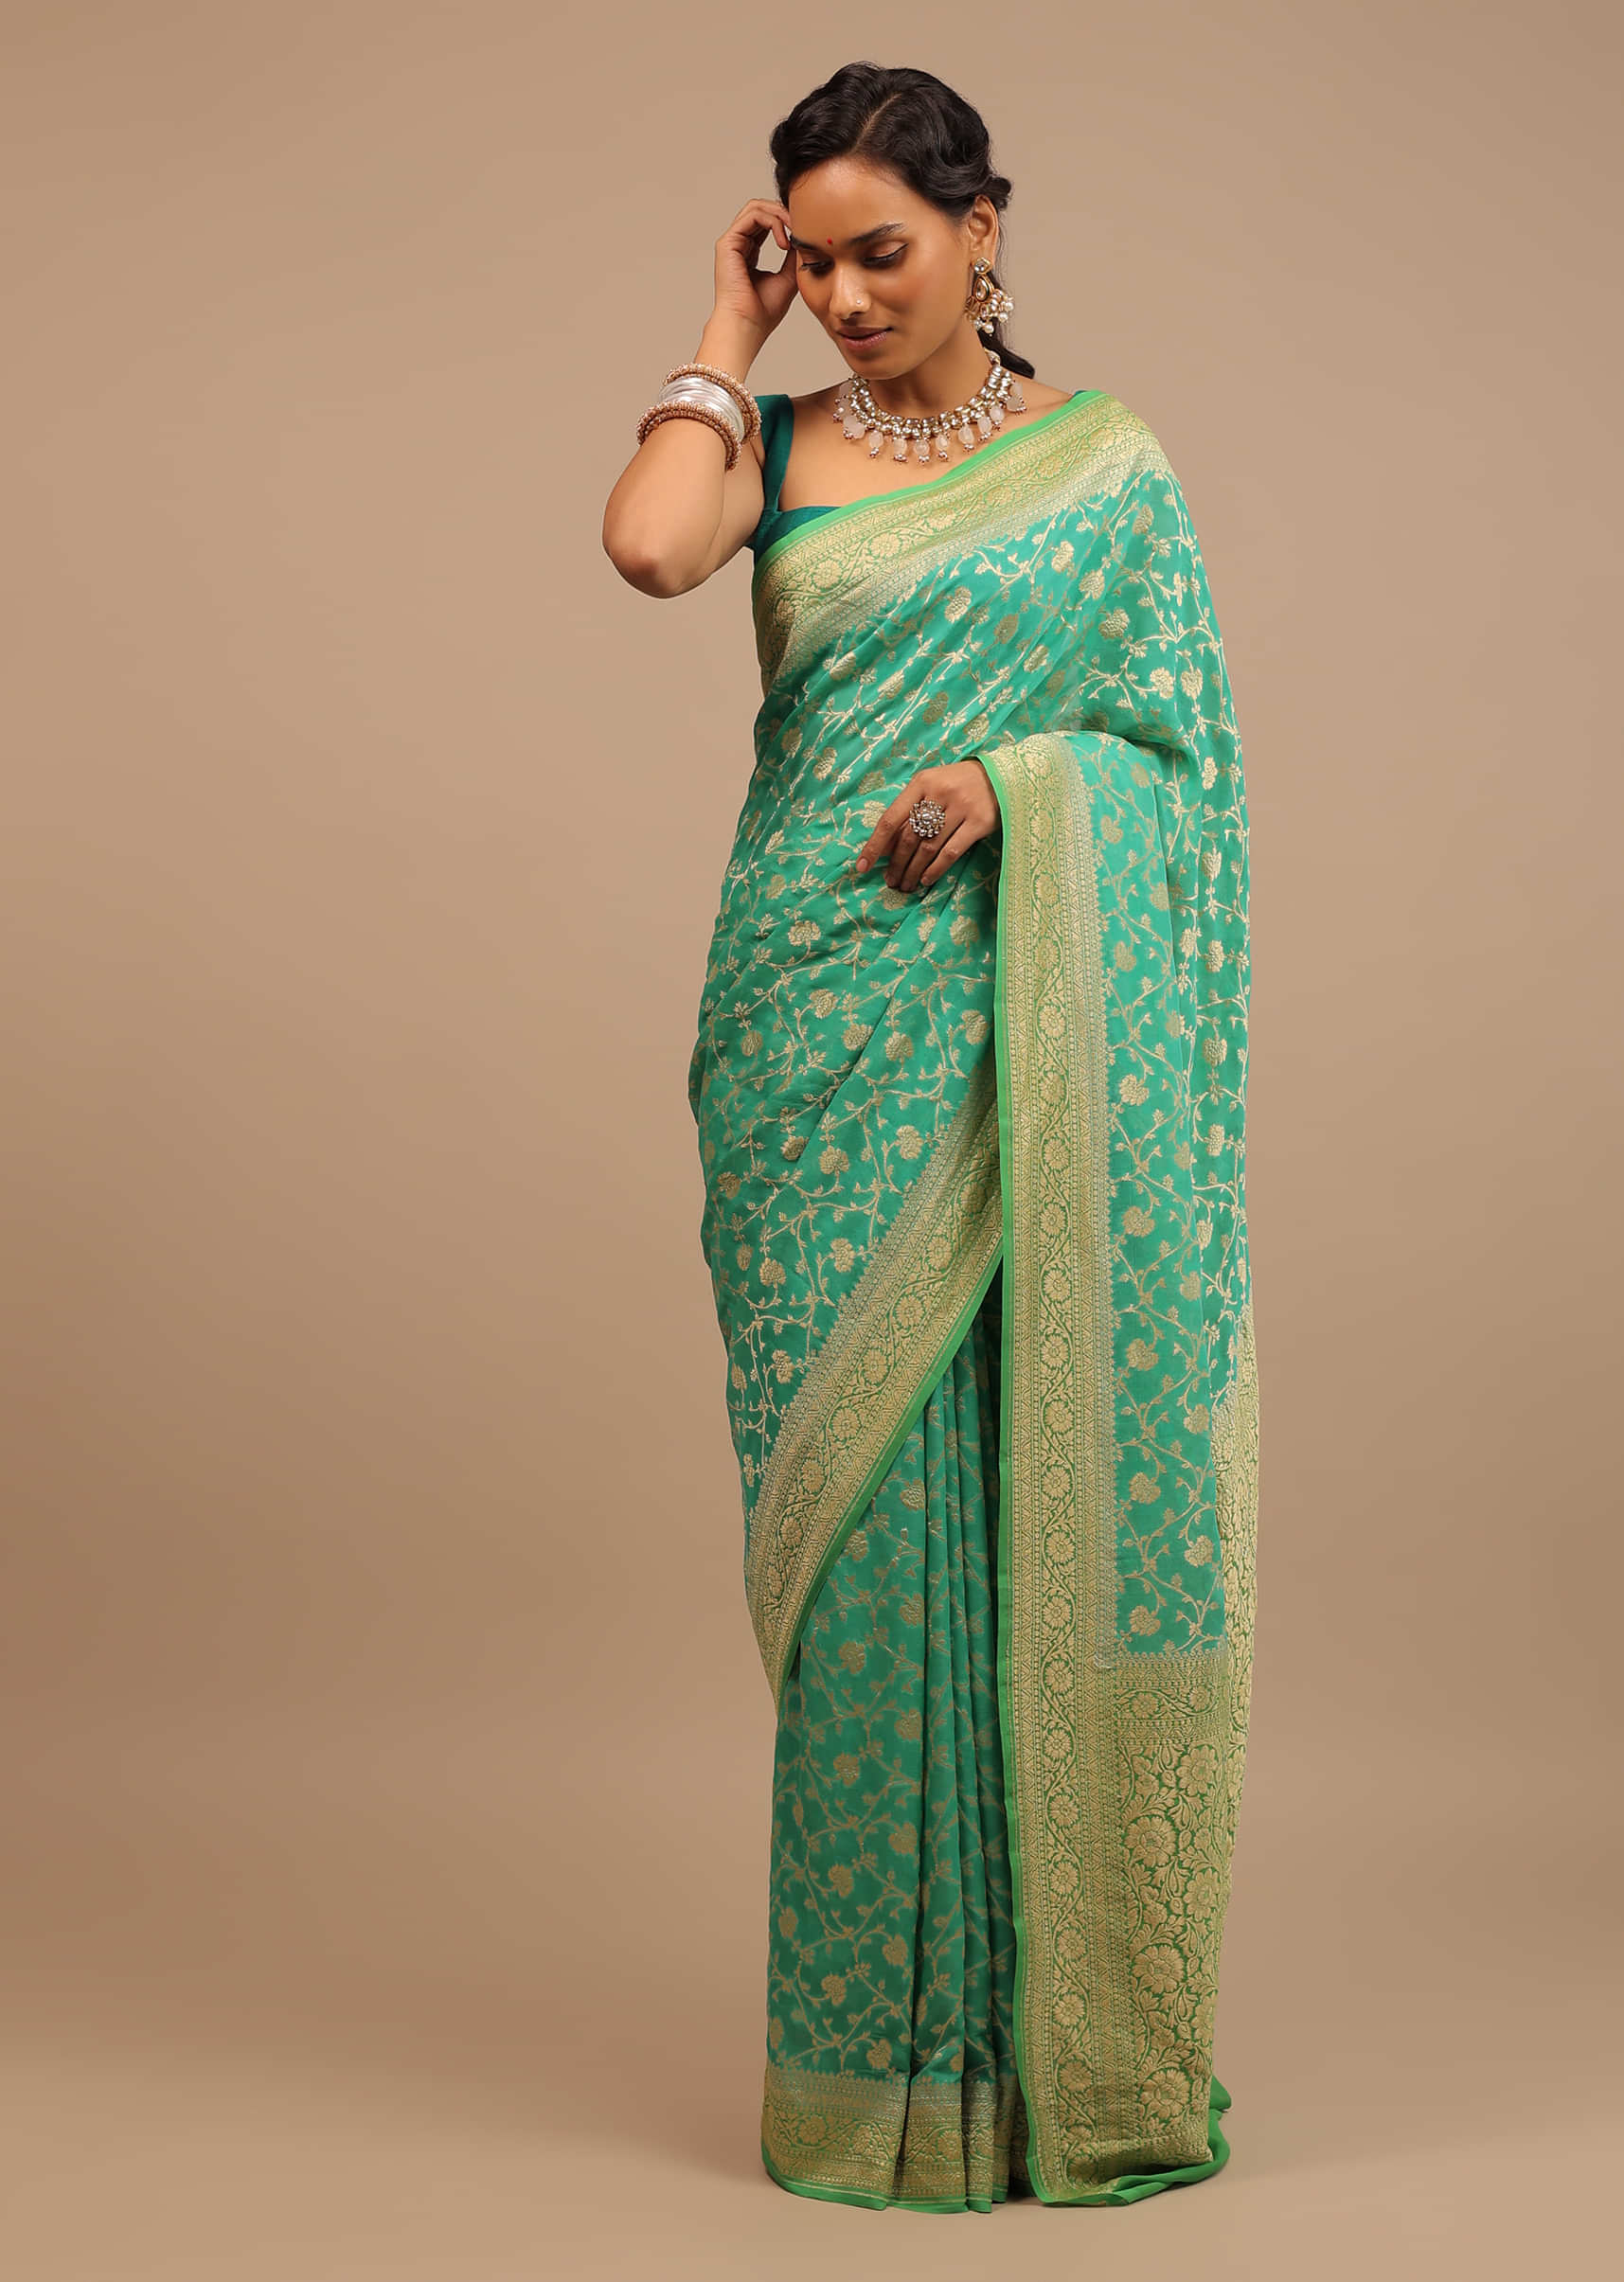 Peacock Green Traditional Saree Made With Georgette And A Beautiful Woven Floral Jaal